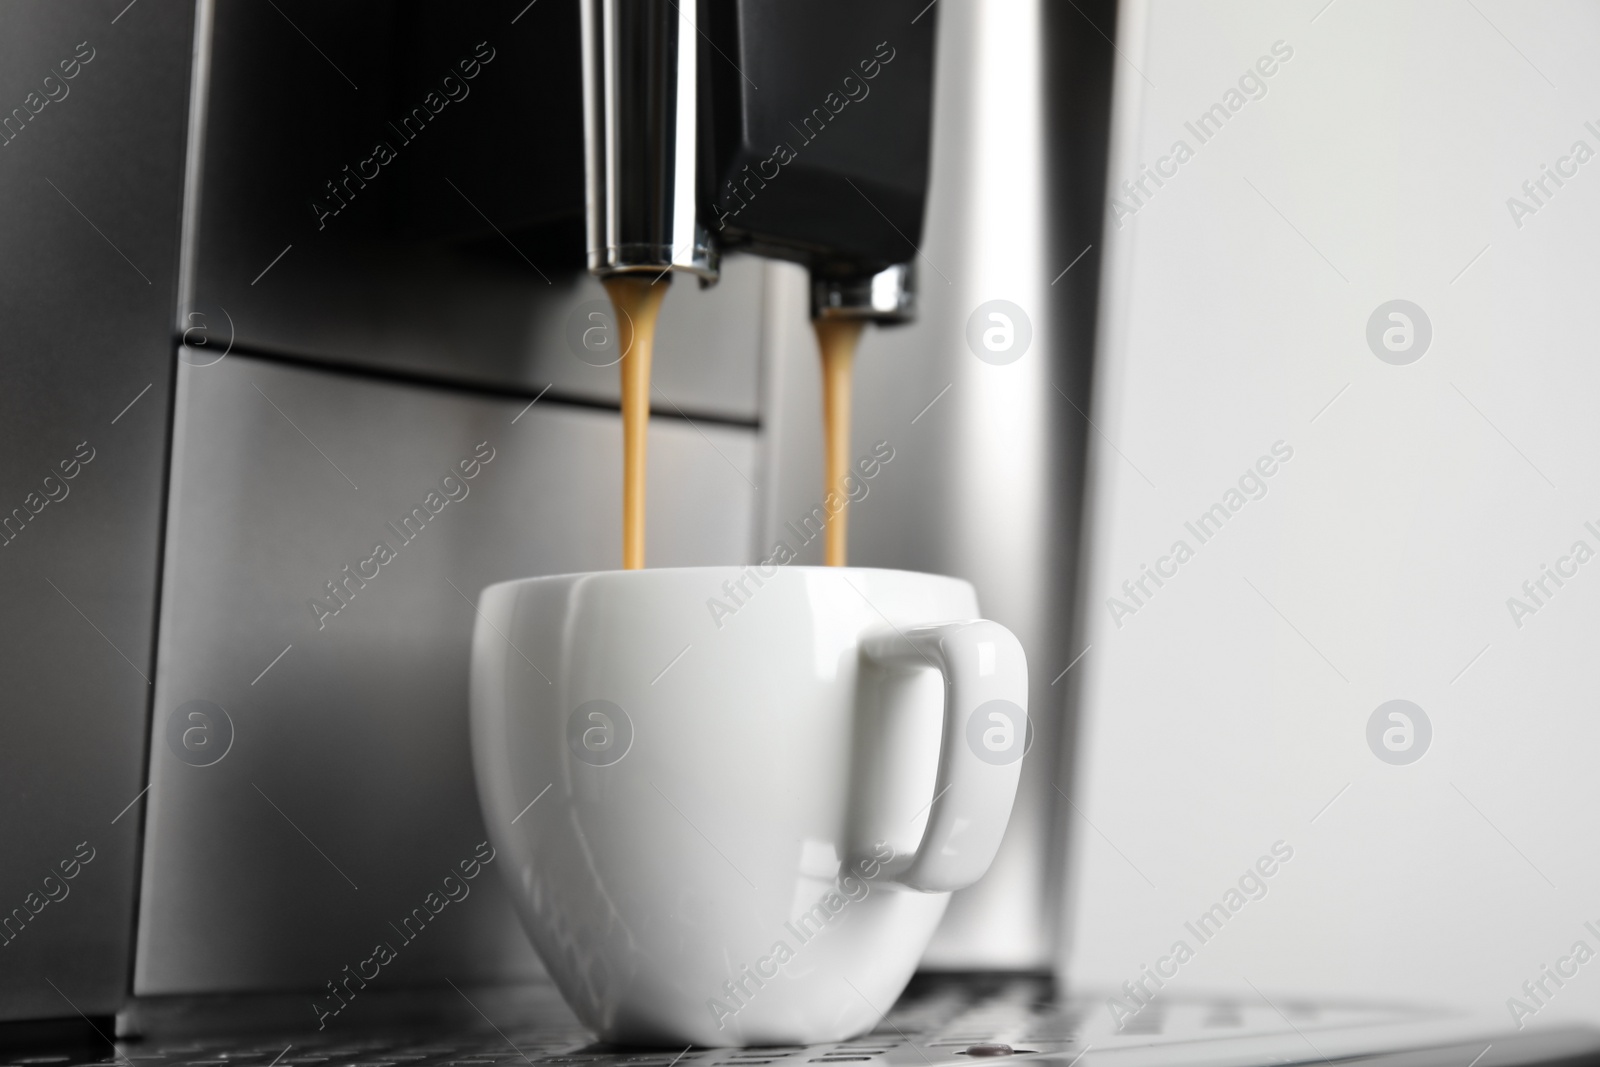 Photo of Espresso machine pouring coffee into cup against light background, closeup